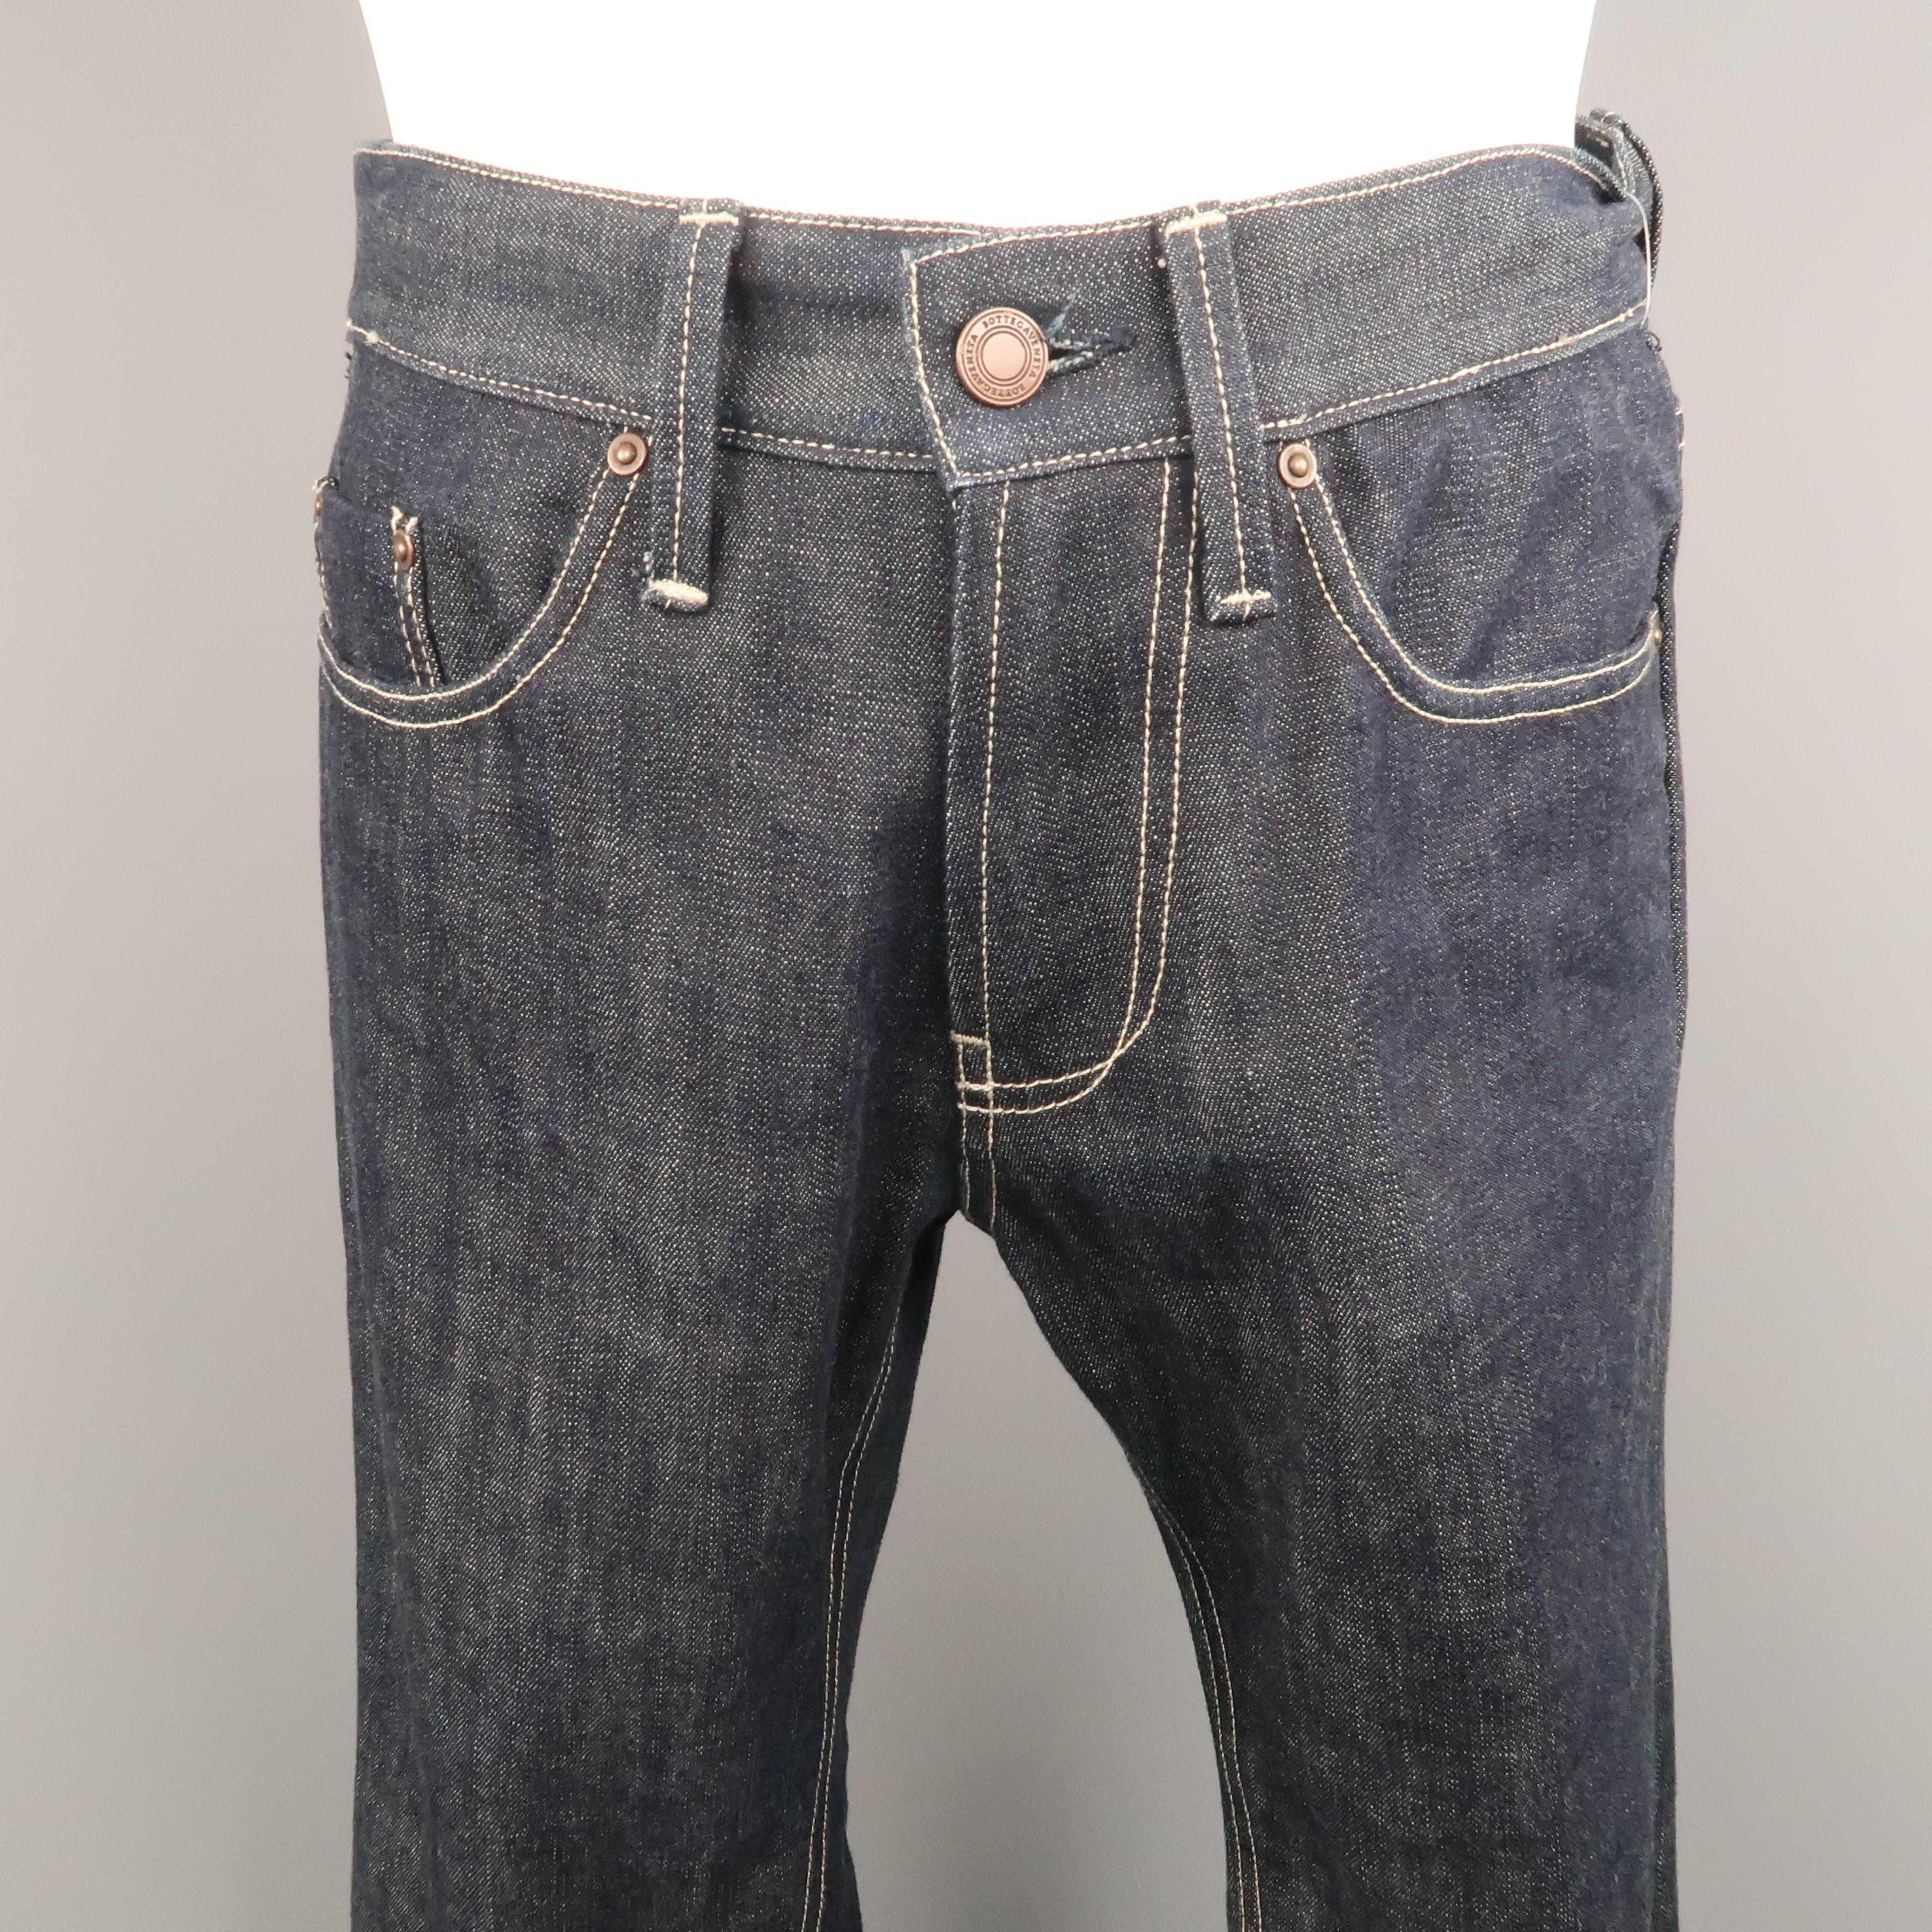 BOTTEGA VENETA jean comes in a indigo denim featuring white contrast stitching, zip fly, and a back pocket embroidery patch. Made in Italy.
 
Excellent Pre-Owned Condition.
Marked: IT 44
 
Measurements:
 
Waist: 30 in.
Rise: 10 in.
Inseam: 30 in.